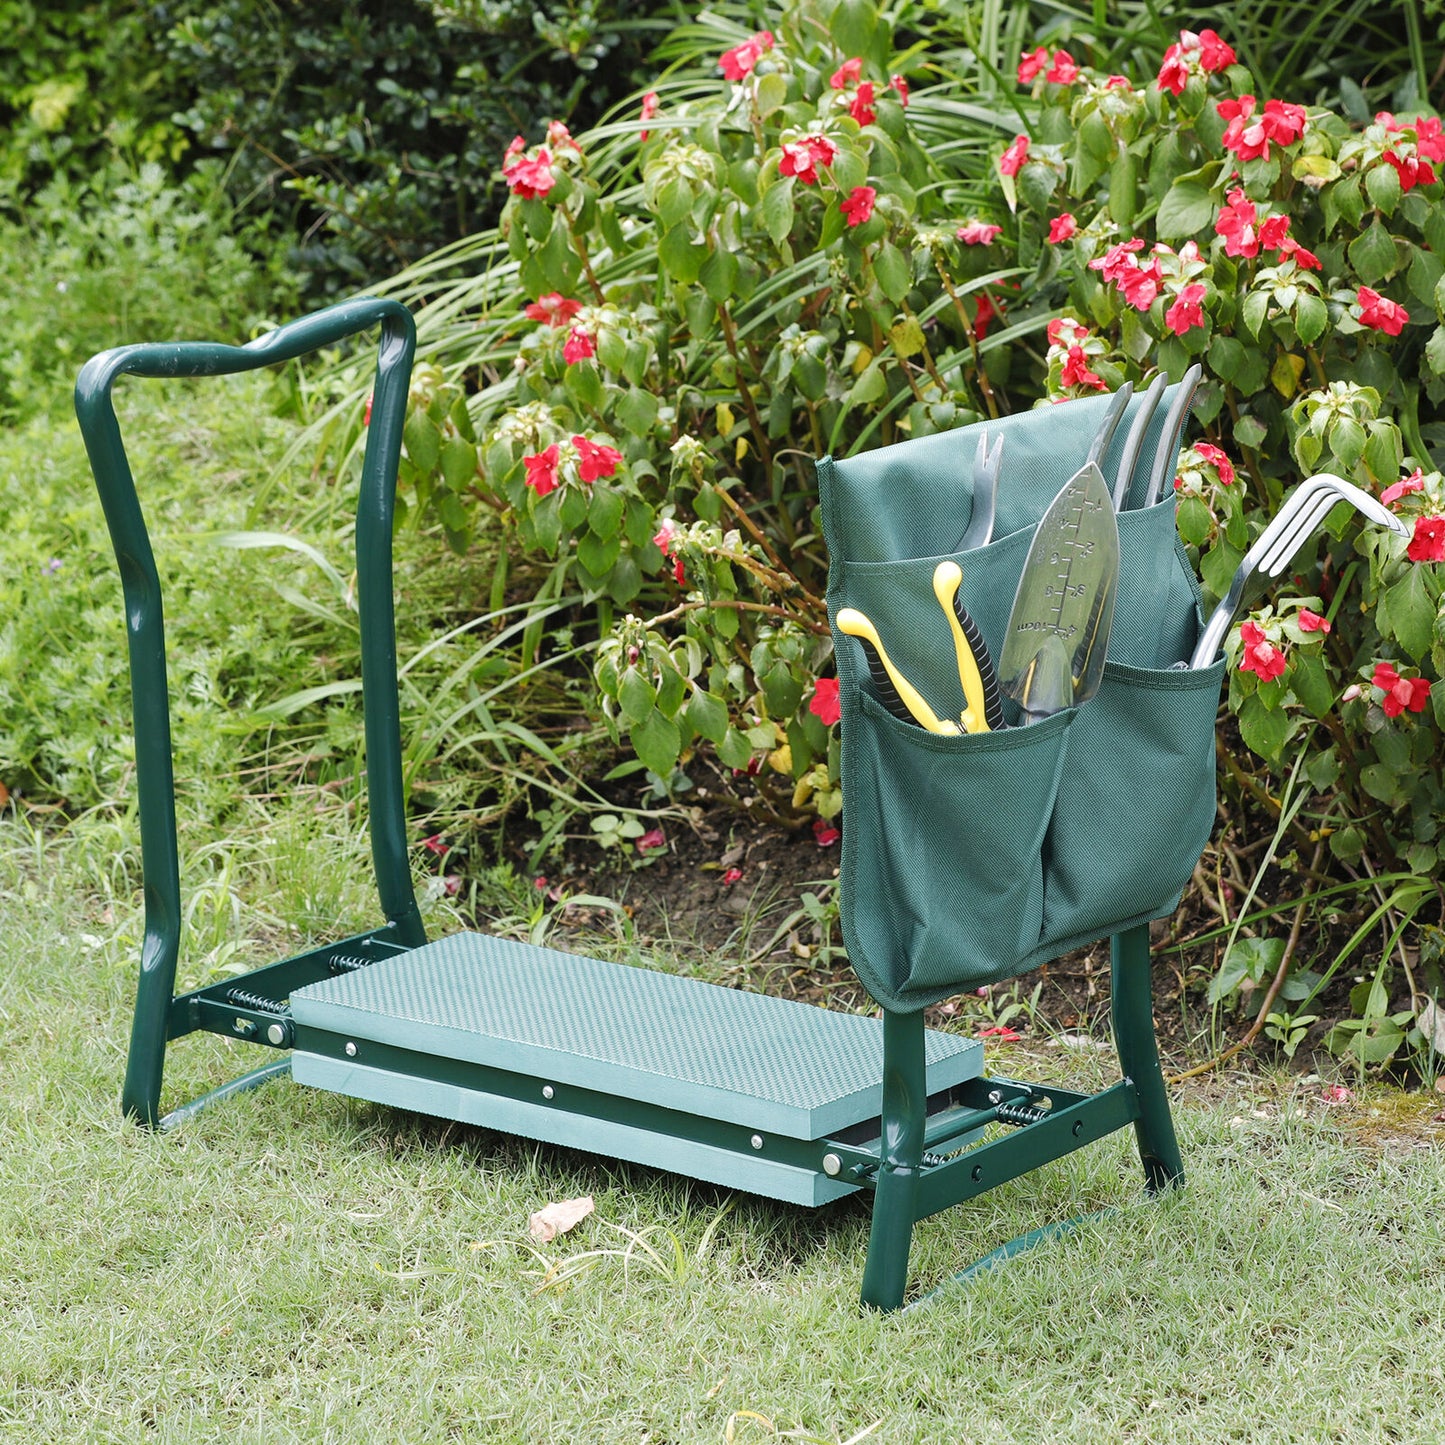 Foldable Garden Kneeler Bench Stool Soft Cushion Seat Pad Kneeling  w Tool Pouch